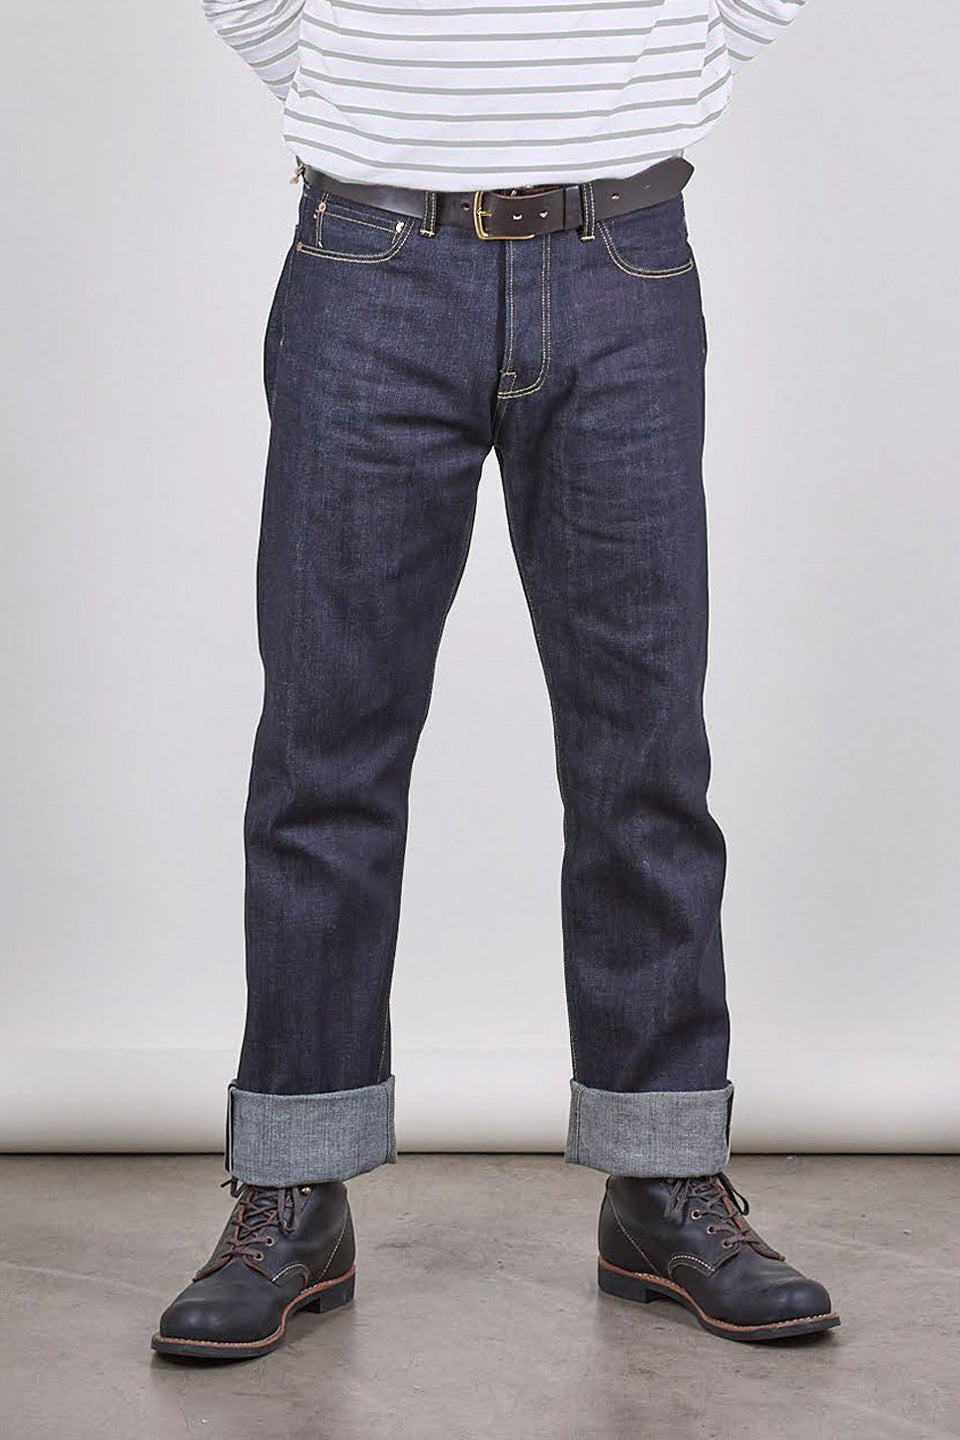 NW1 Relaxed Heritage Indigo 14oz Japanese Raw Selvedge Mens Jeans ...